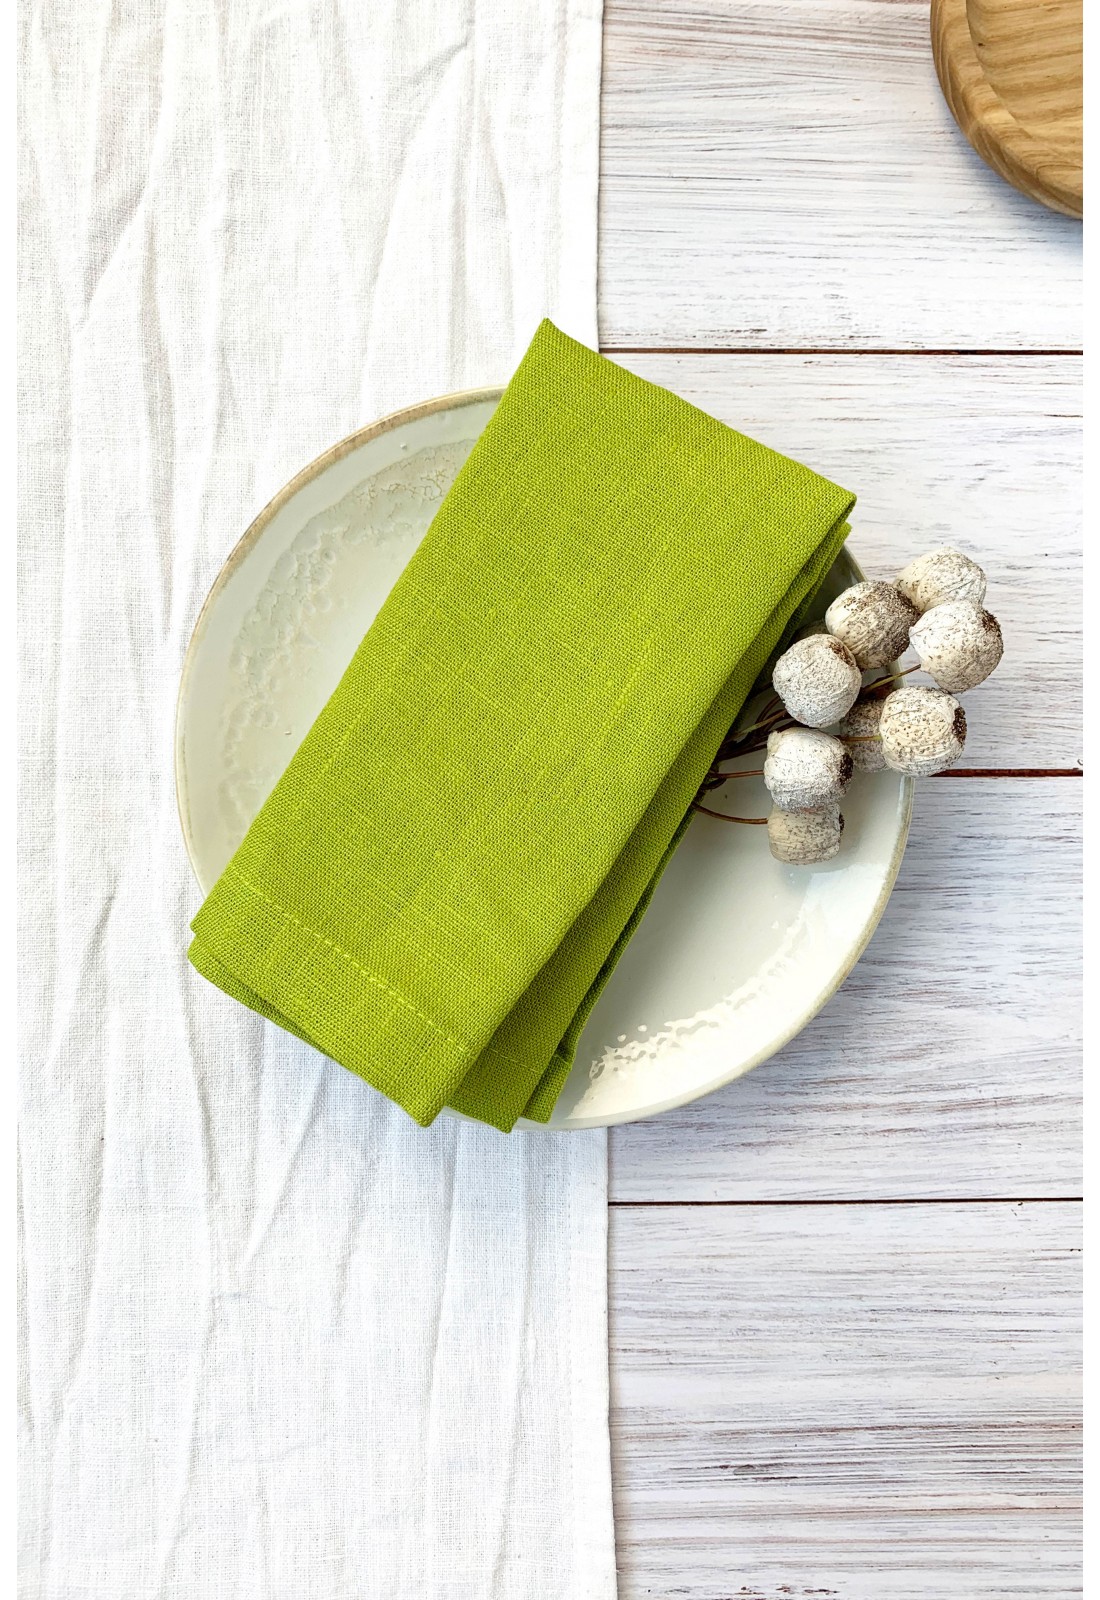 https://www.touchablelinen.com/image/cache/catalog/products/22/Linen-napkins-All-colors-and-sizes-14-1100x1600.jpg